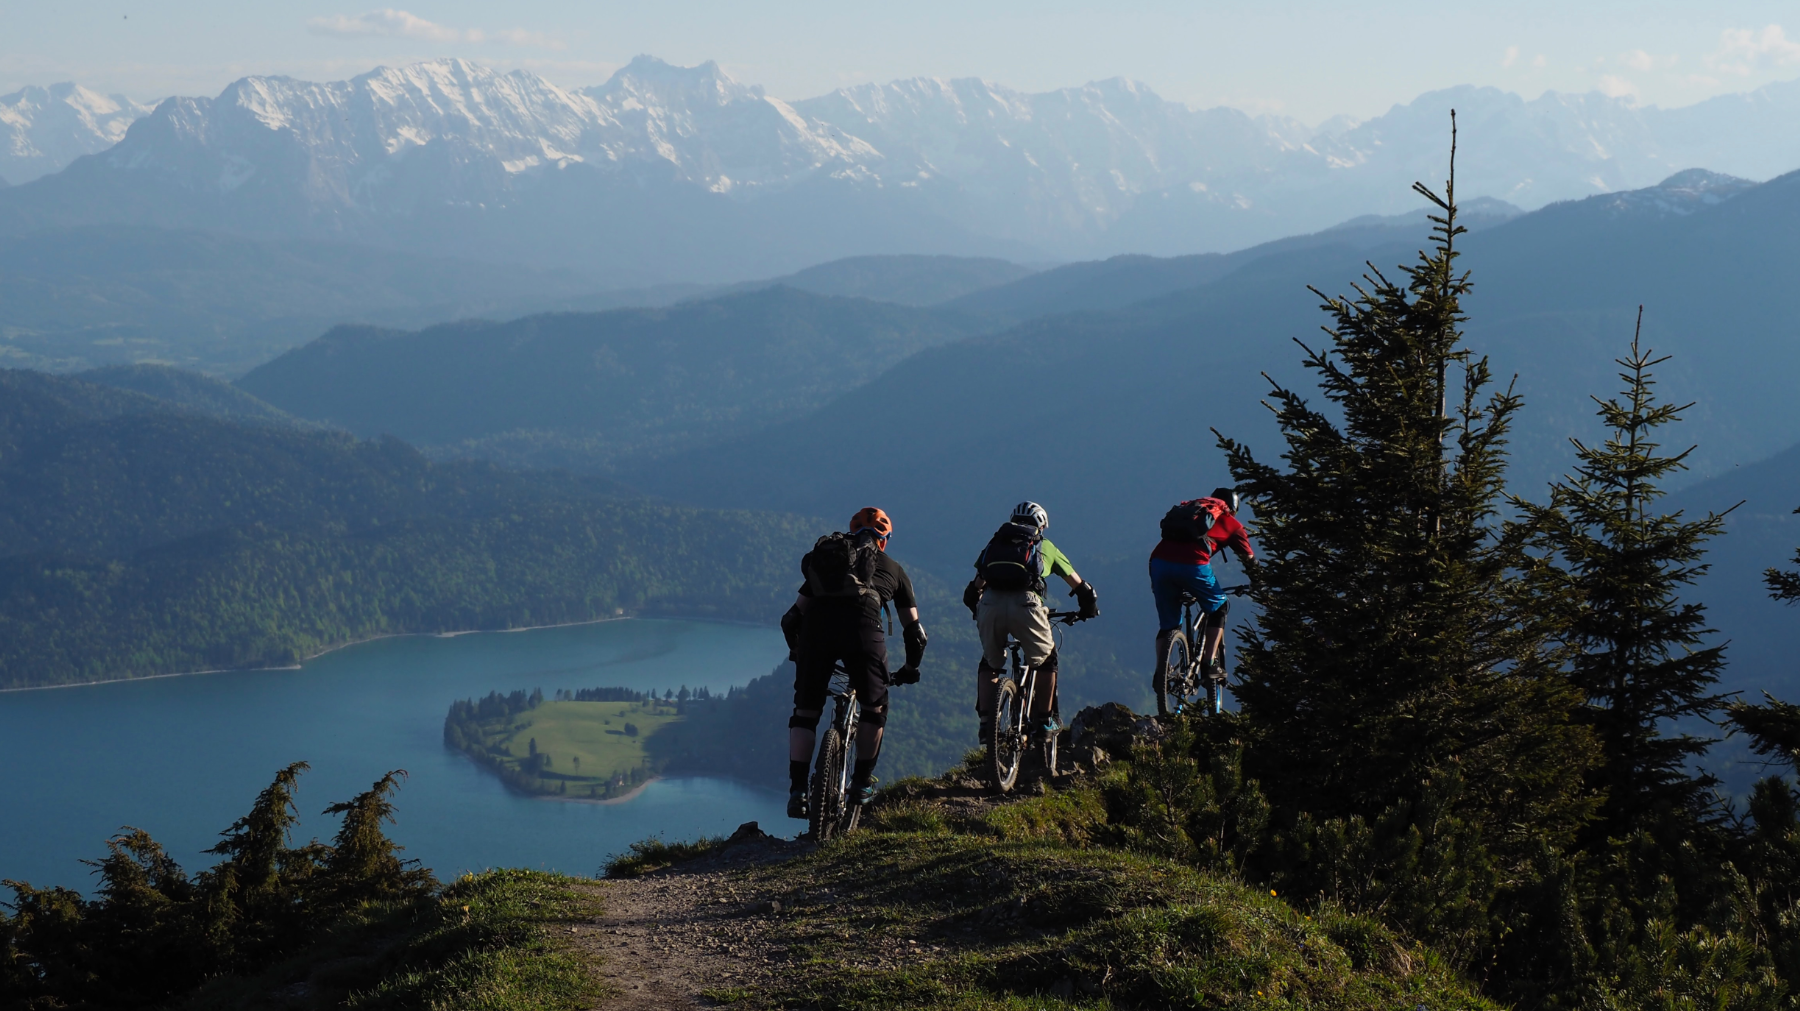 Mountain bikers on a scenic ride.